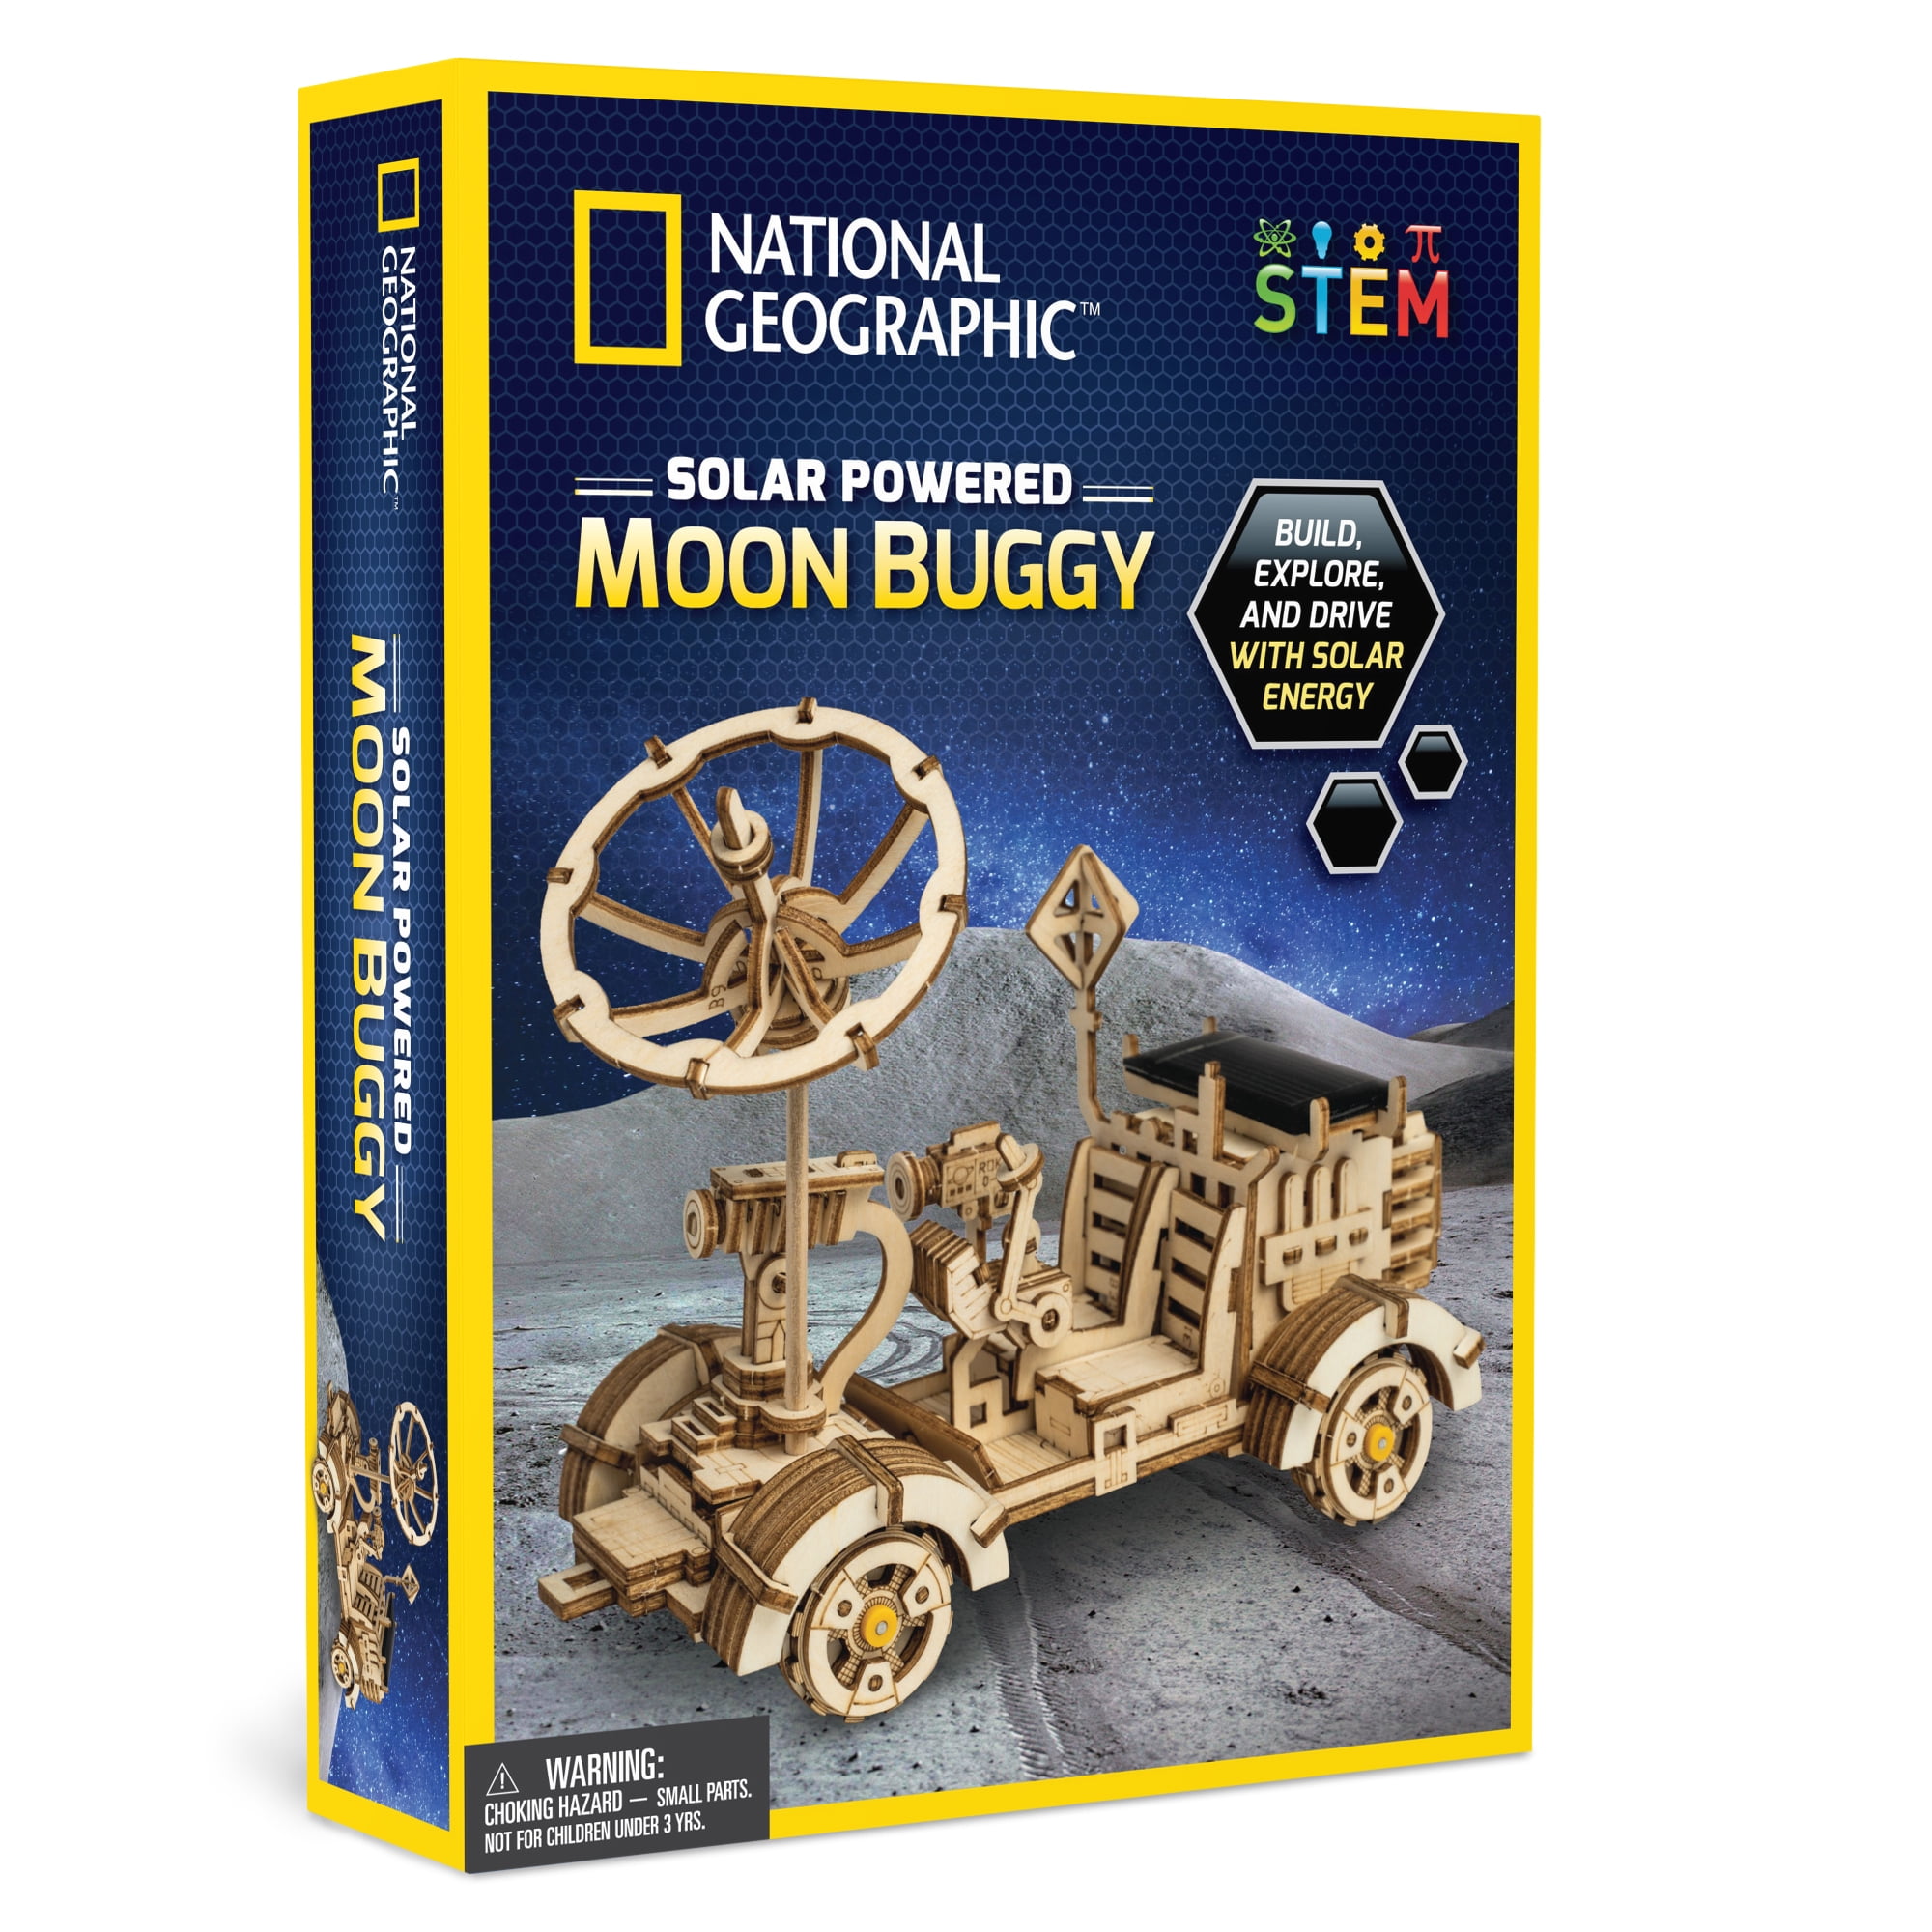 DIY Solar-Powered Car Includes One 3D Puzzle to Build A Moon Buggy Great Stem Toy for Girls & Boys Interested in Outer Space & Engineering NATIONAL GEOGRAPHIC Wooden Model Kit 